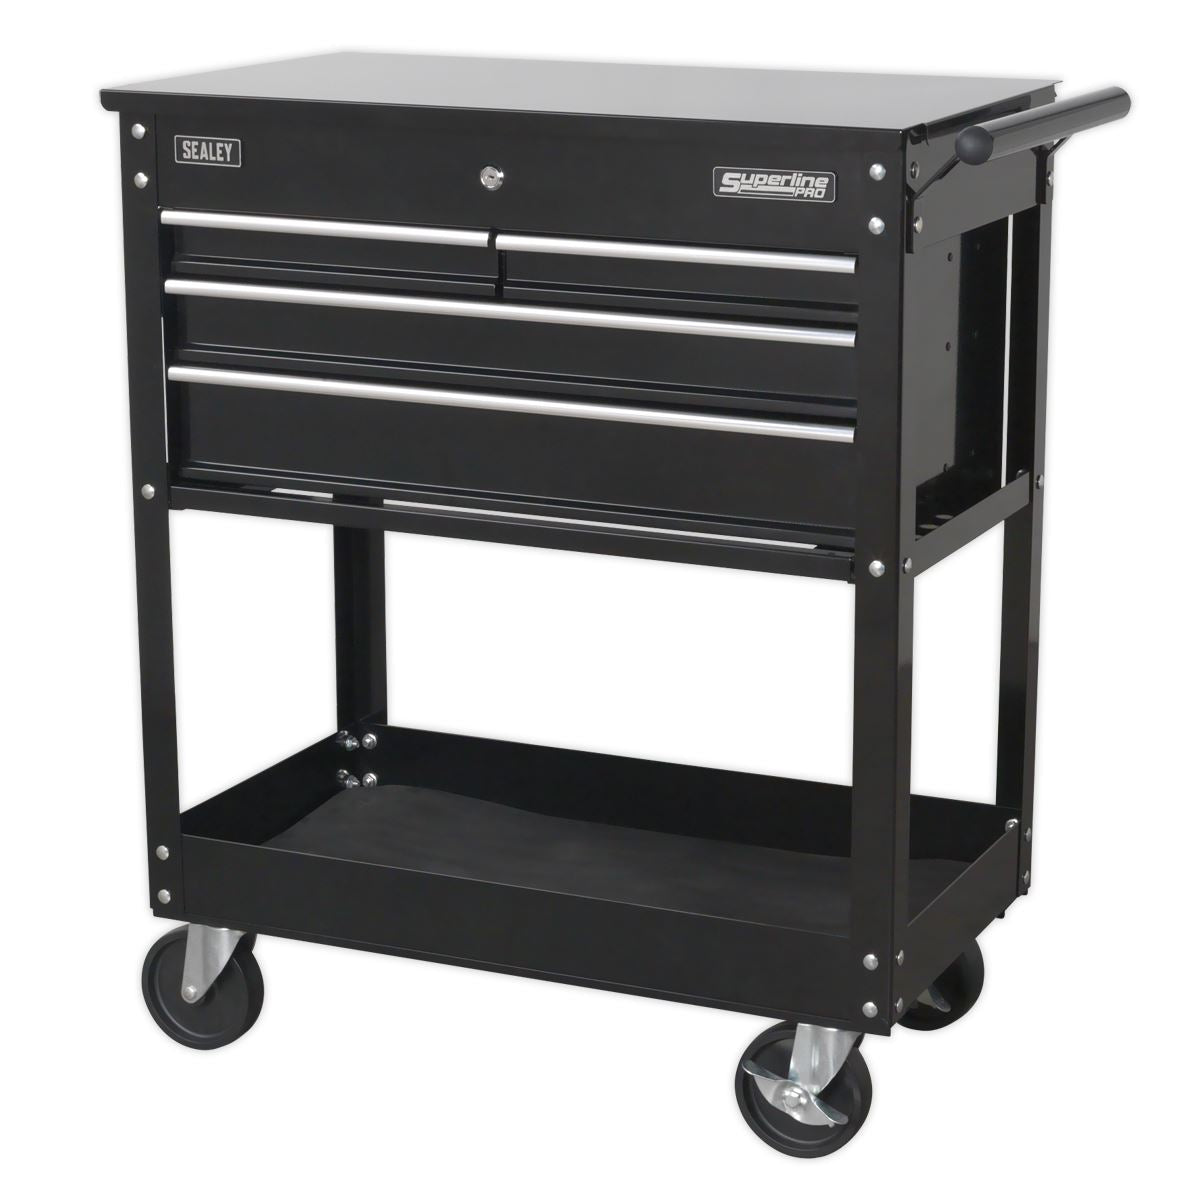 Sealey Superline Pro Heavy-Duty Mobile Tool & Parts Trolley with 4 Drawers & Lockable Top - Black